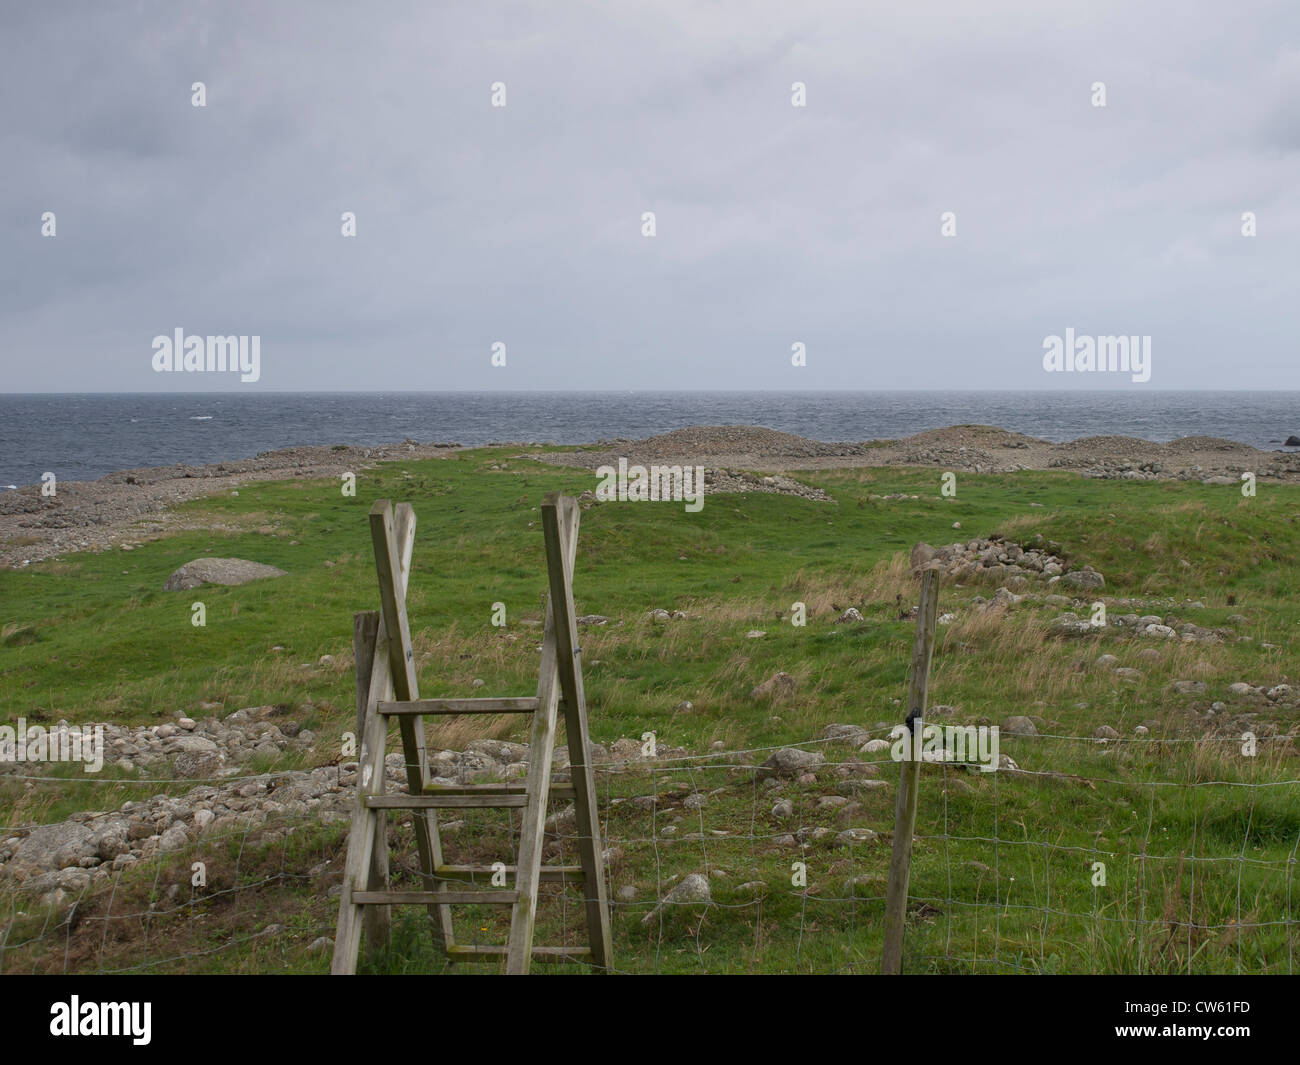 Ladder set up to help walkers cross a wire fence. Jaeren outside of Stavanger Norway has many footpaths along the coast . Stock Photo